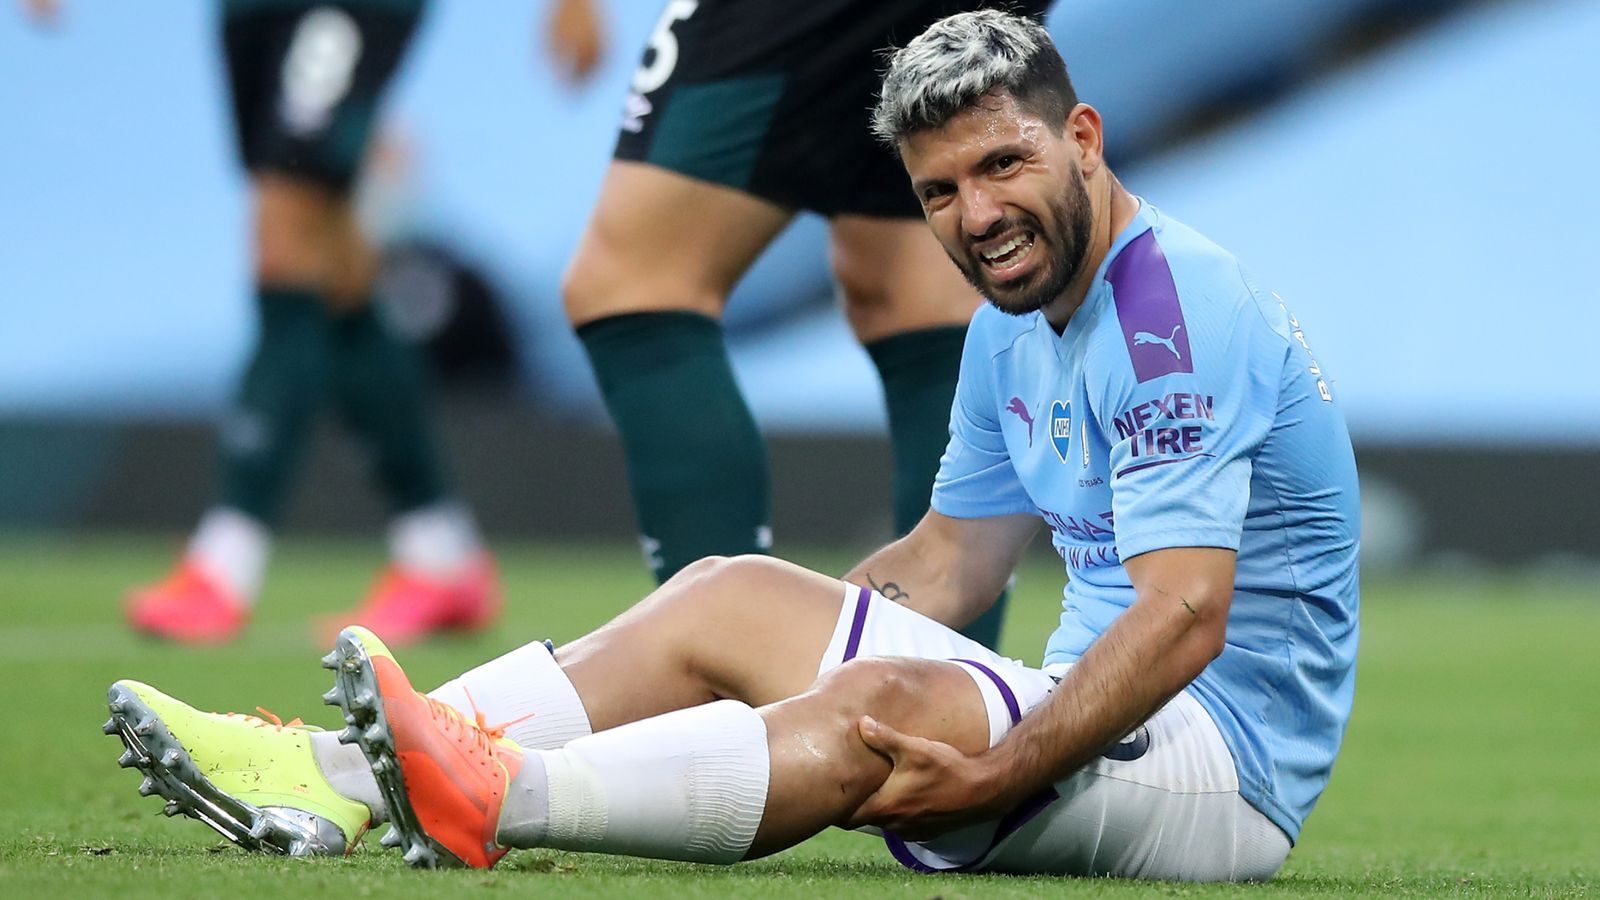 Aguero Tweets about Trying to Recover His Left Knee Quickly